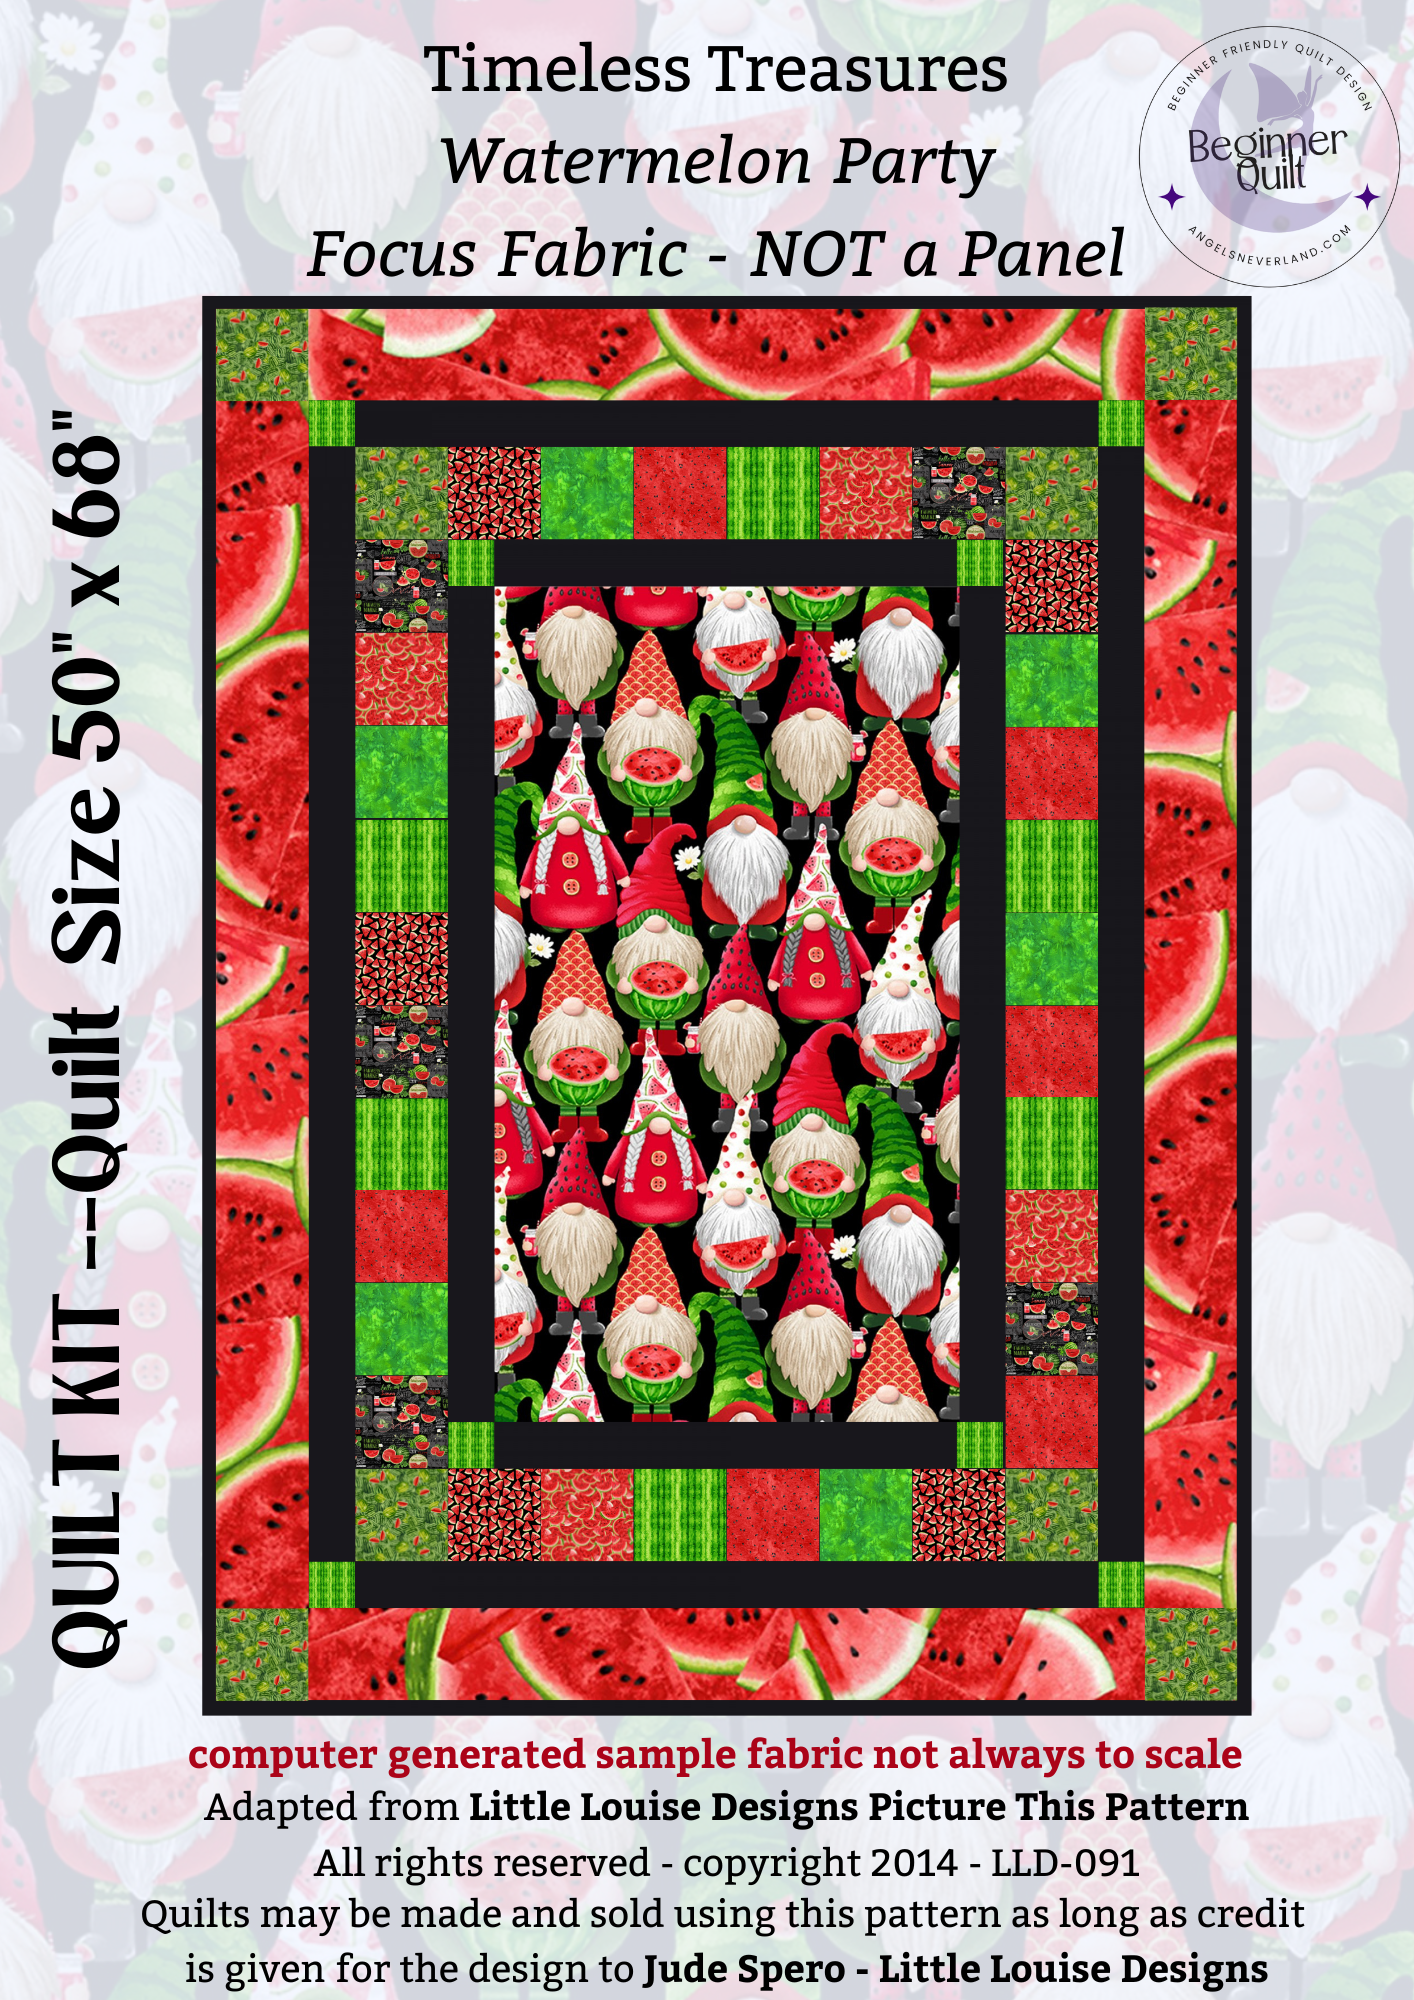 Beginner Gnome Quilt Kit Timeless Treasures Watermelon Party with Picture This Pattern